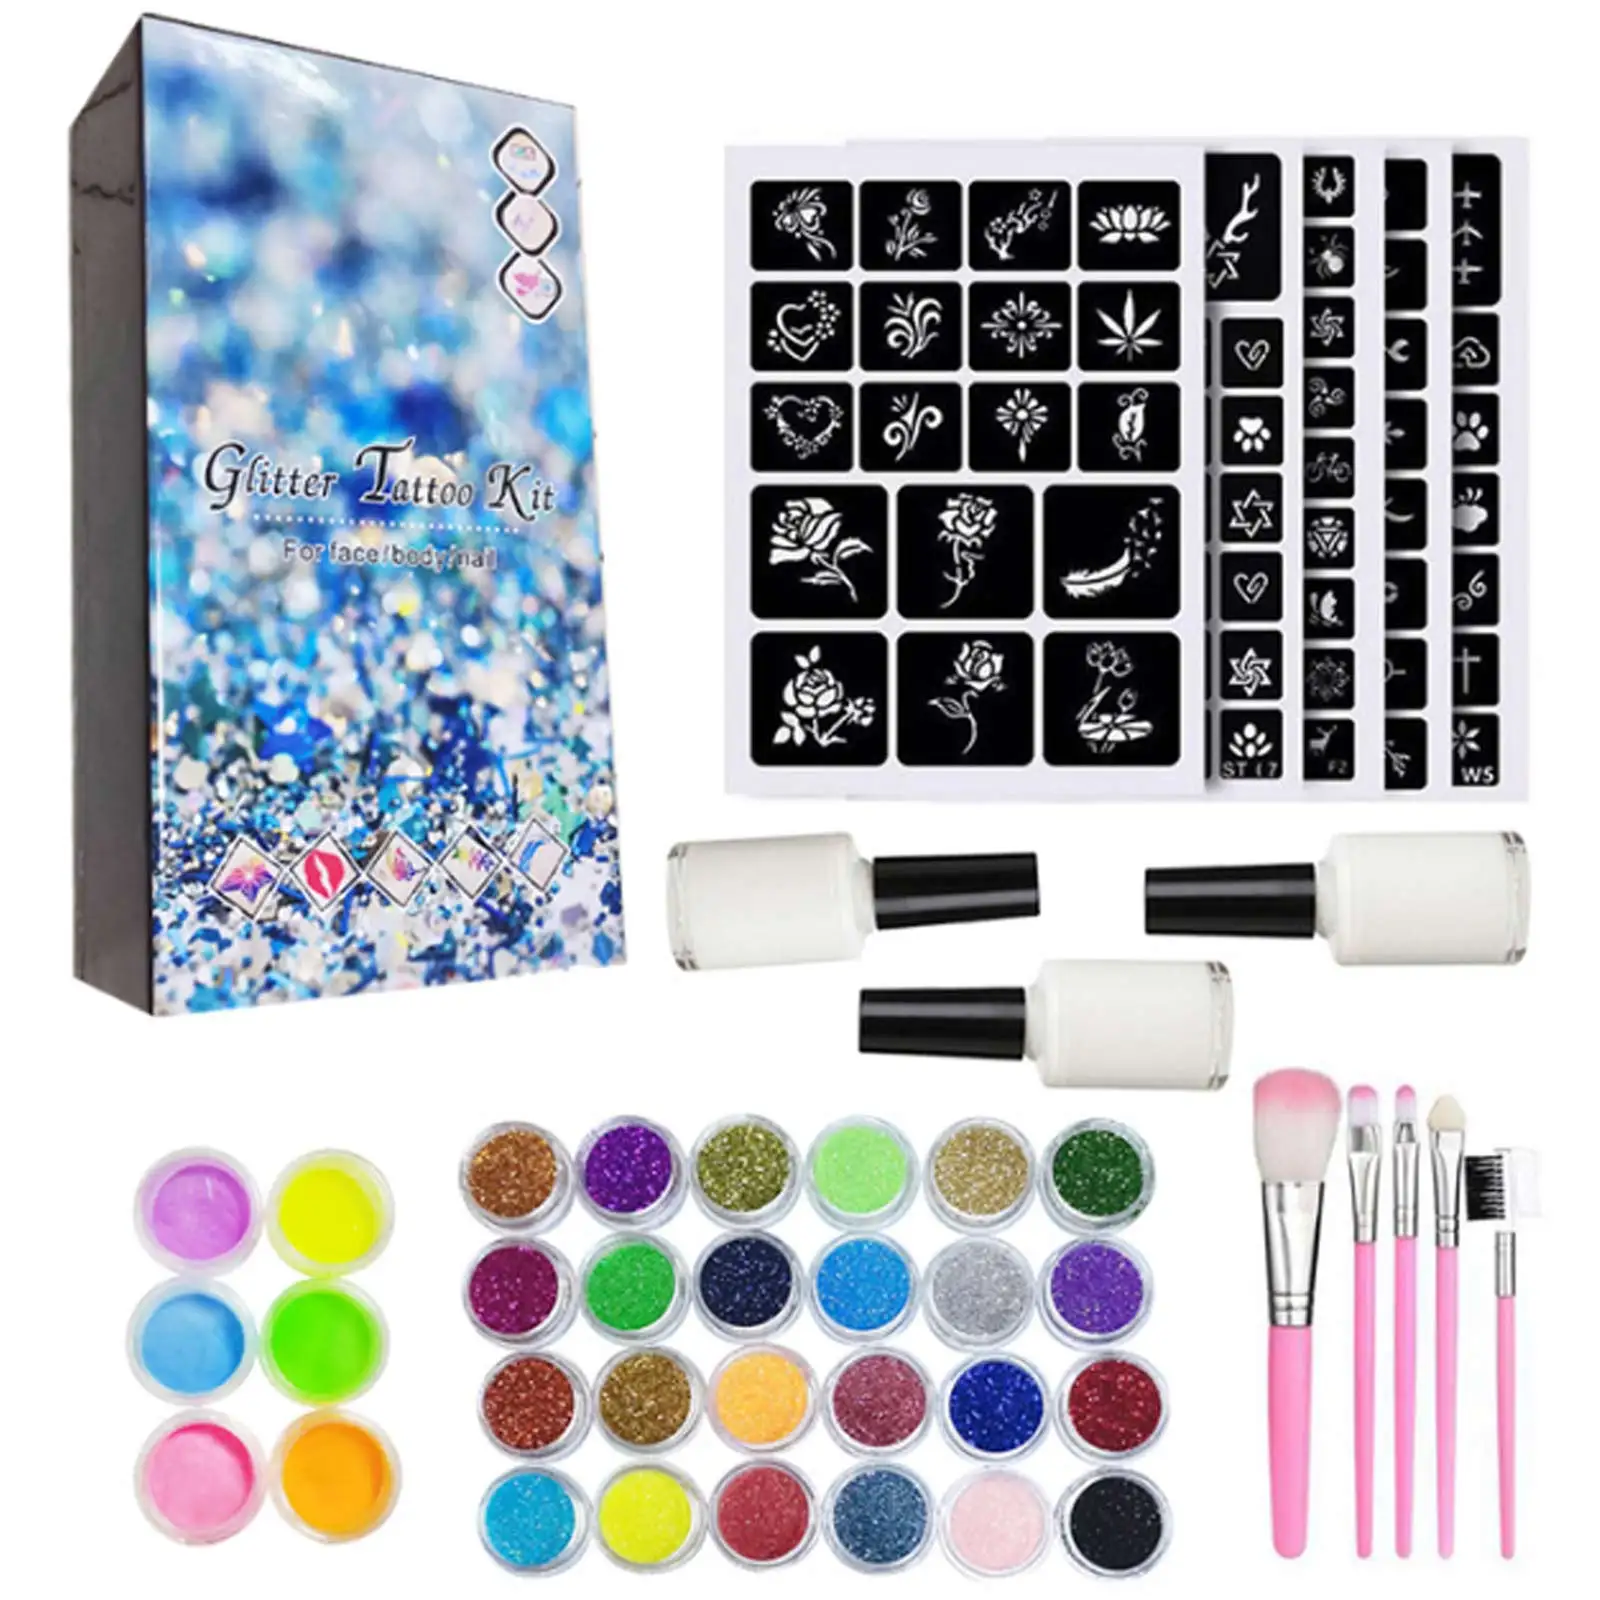 Temporary Glitter Tattoos Kit for Kids 200 Stencils 24 Glitter Colors 5 Brushes 3 Body Glue Sparkly Colorful Tattoos for Girls T